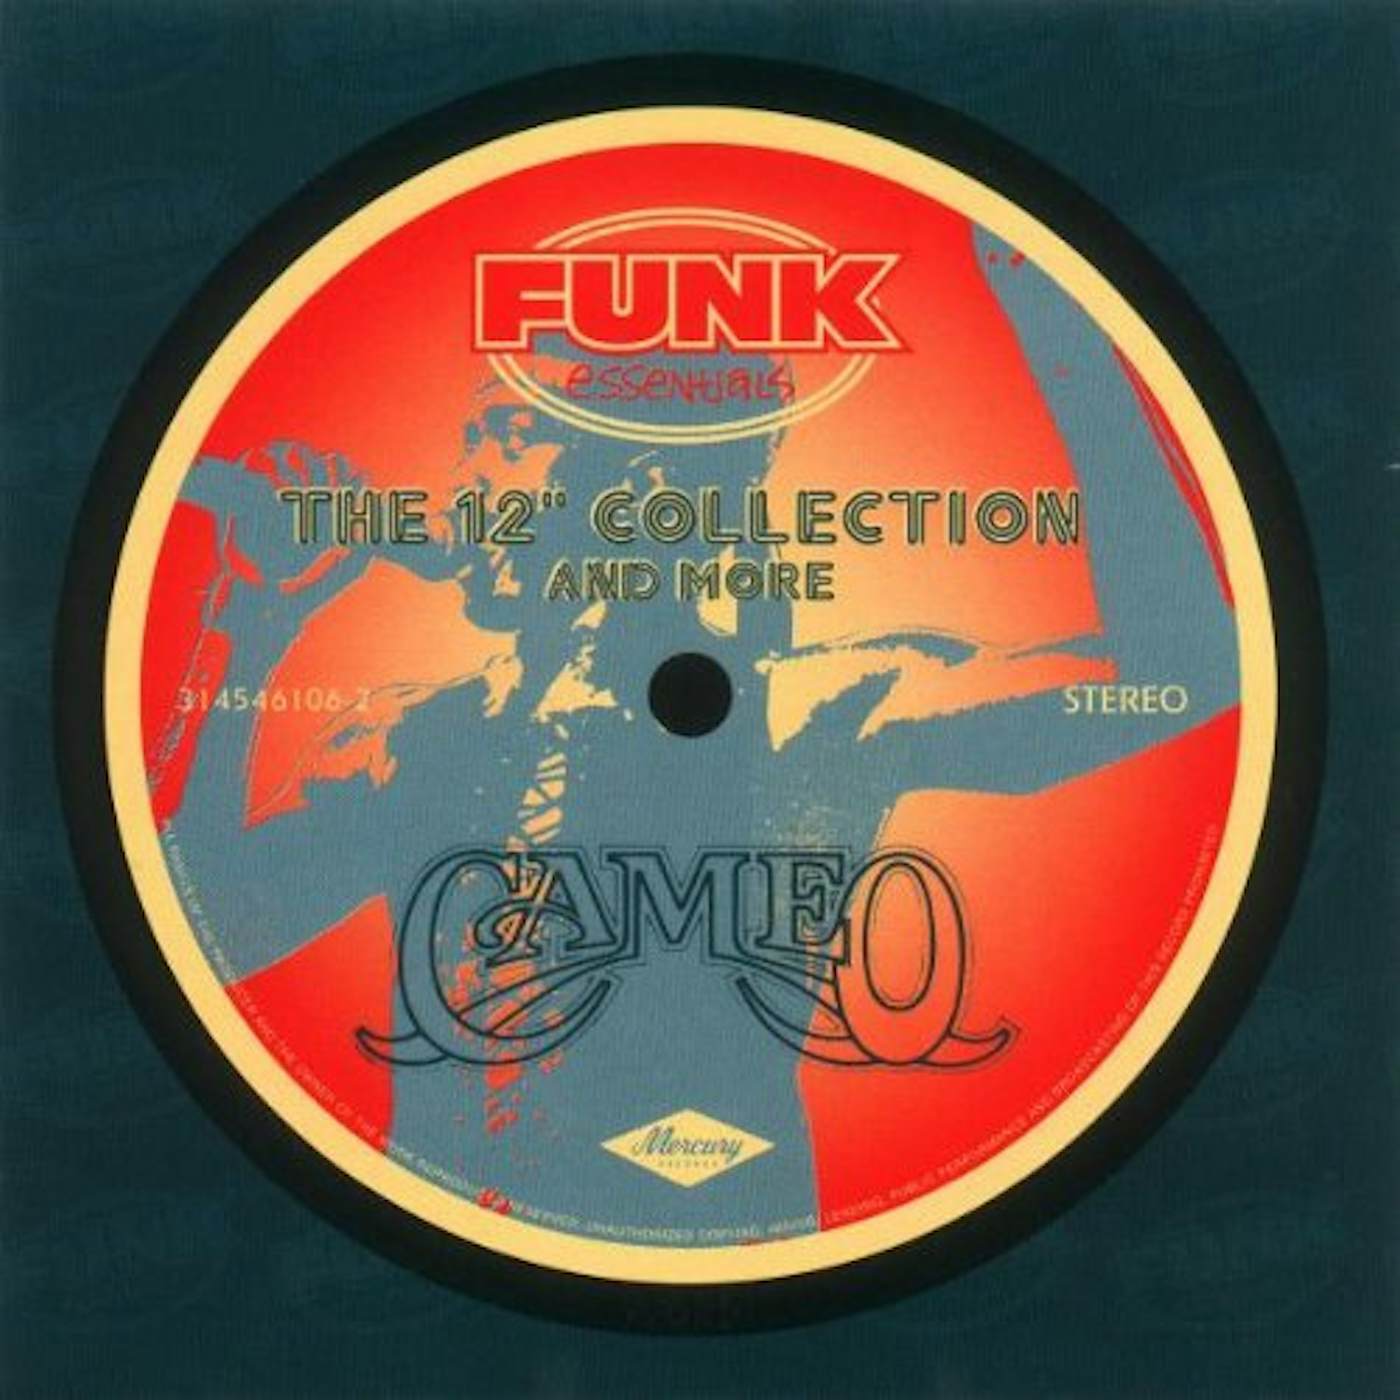 Cameo 12-INCH COLLECTION & MORE CD